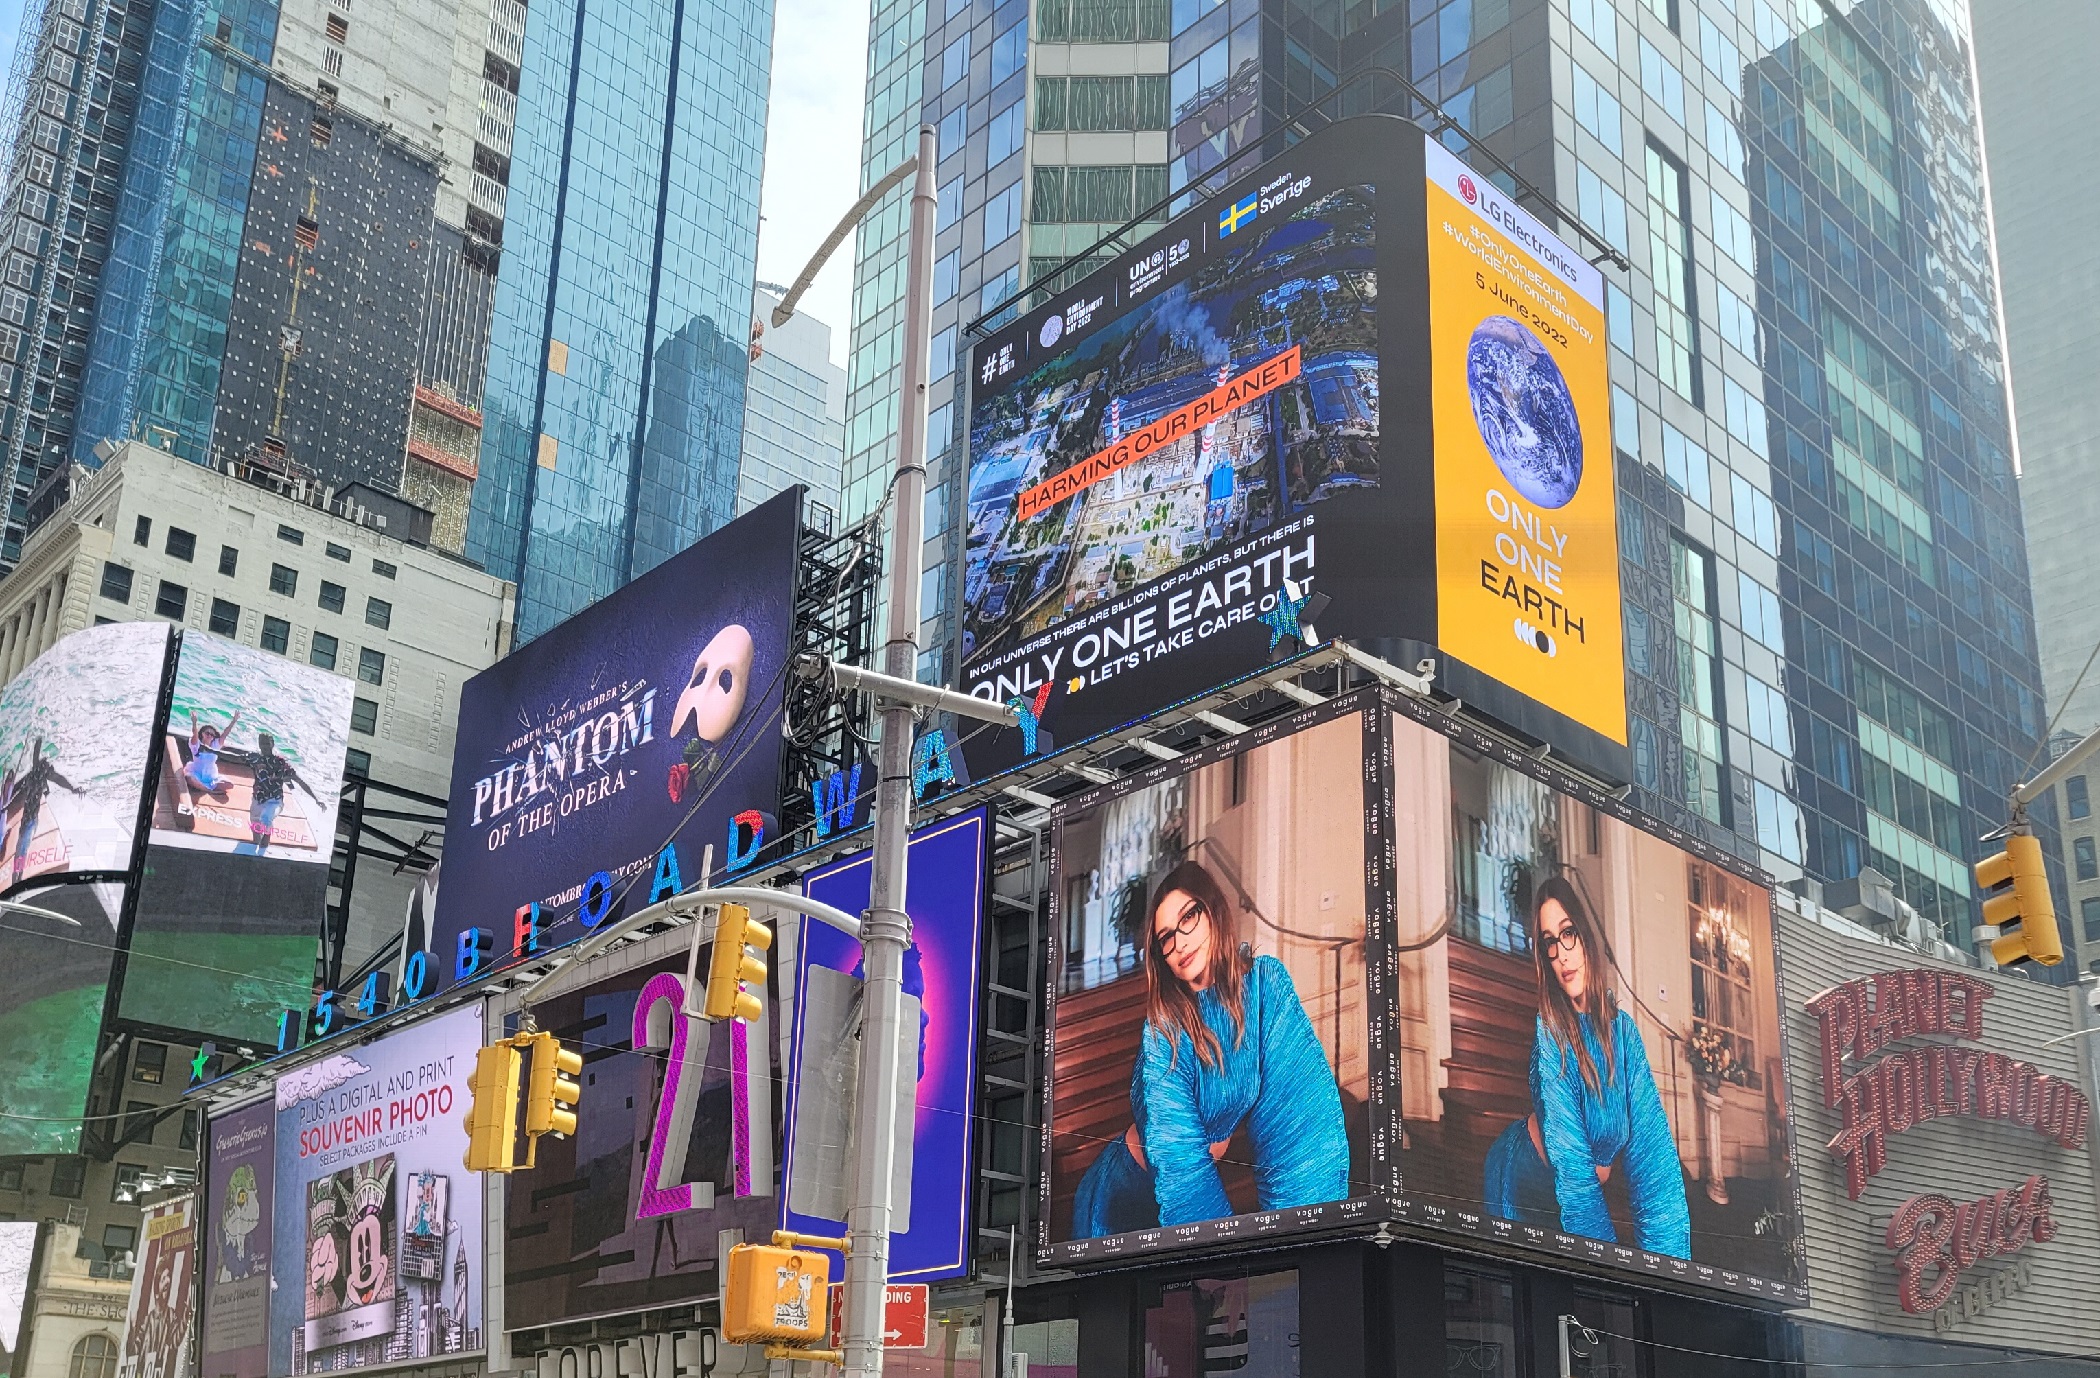 The view around LG's digital billboard in Time Square, New York displaying a video of LG's Only One Earth campaign